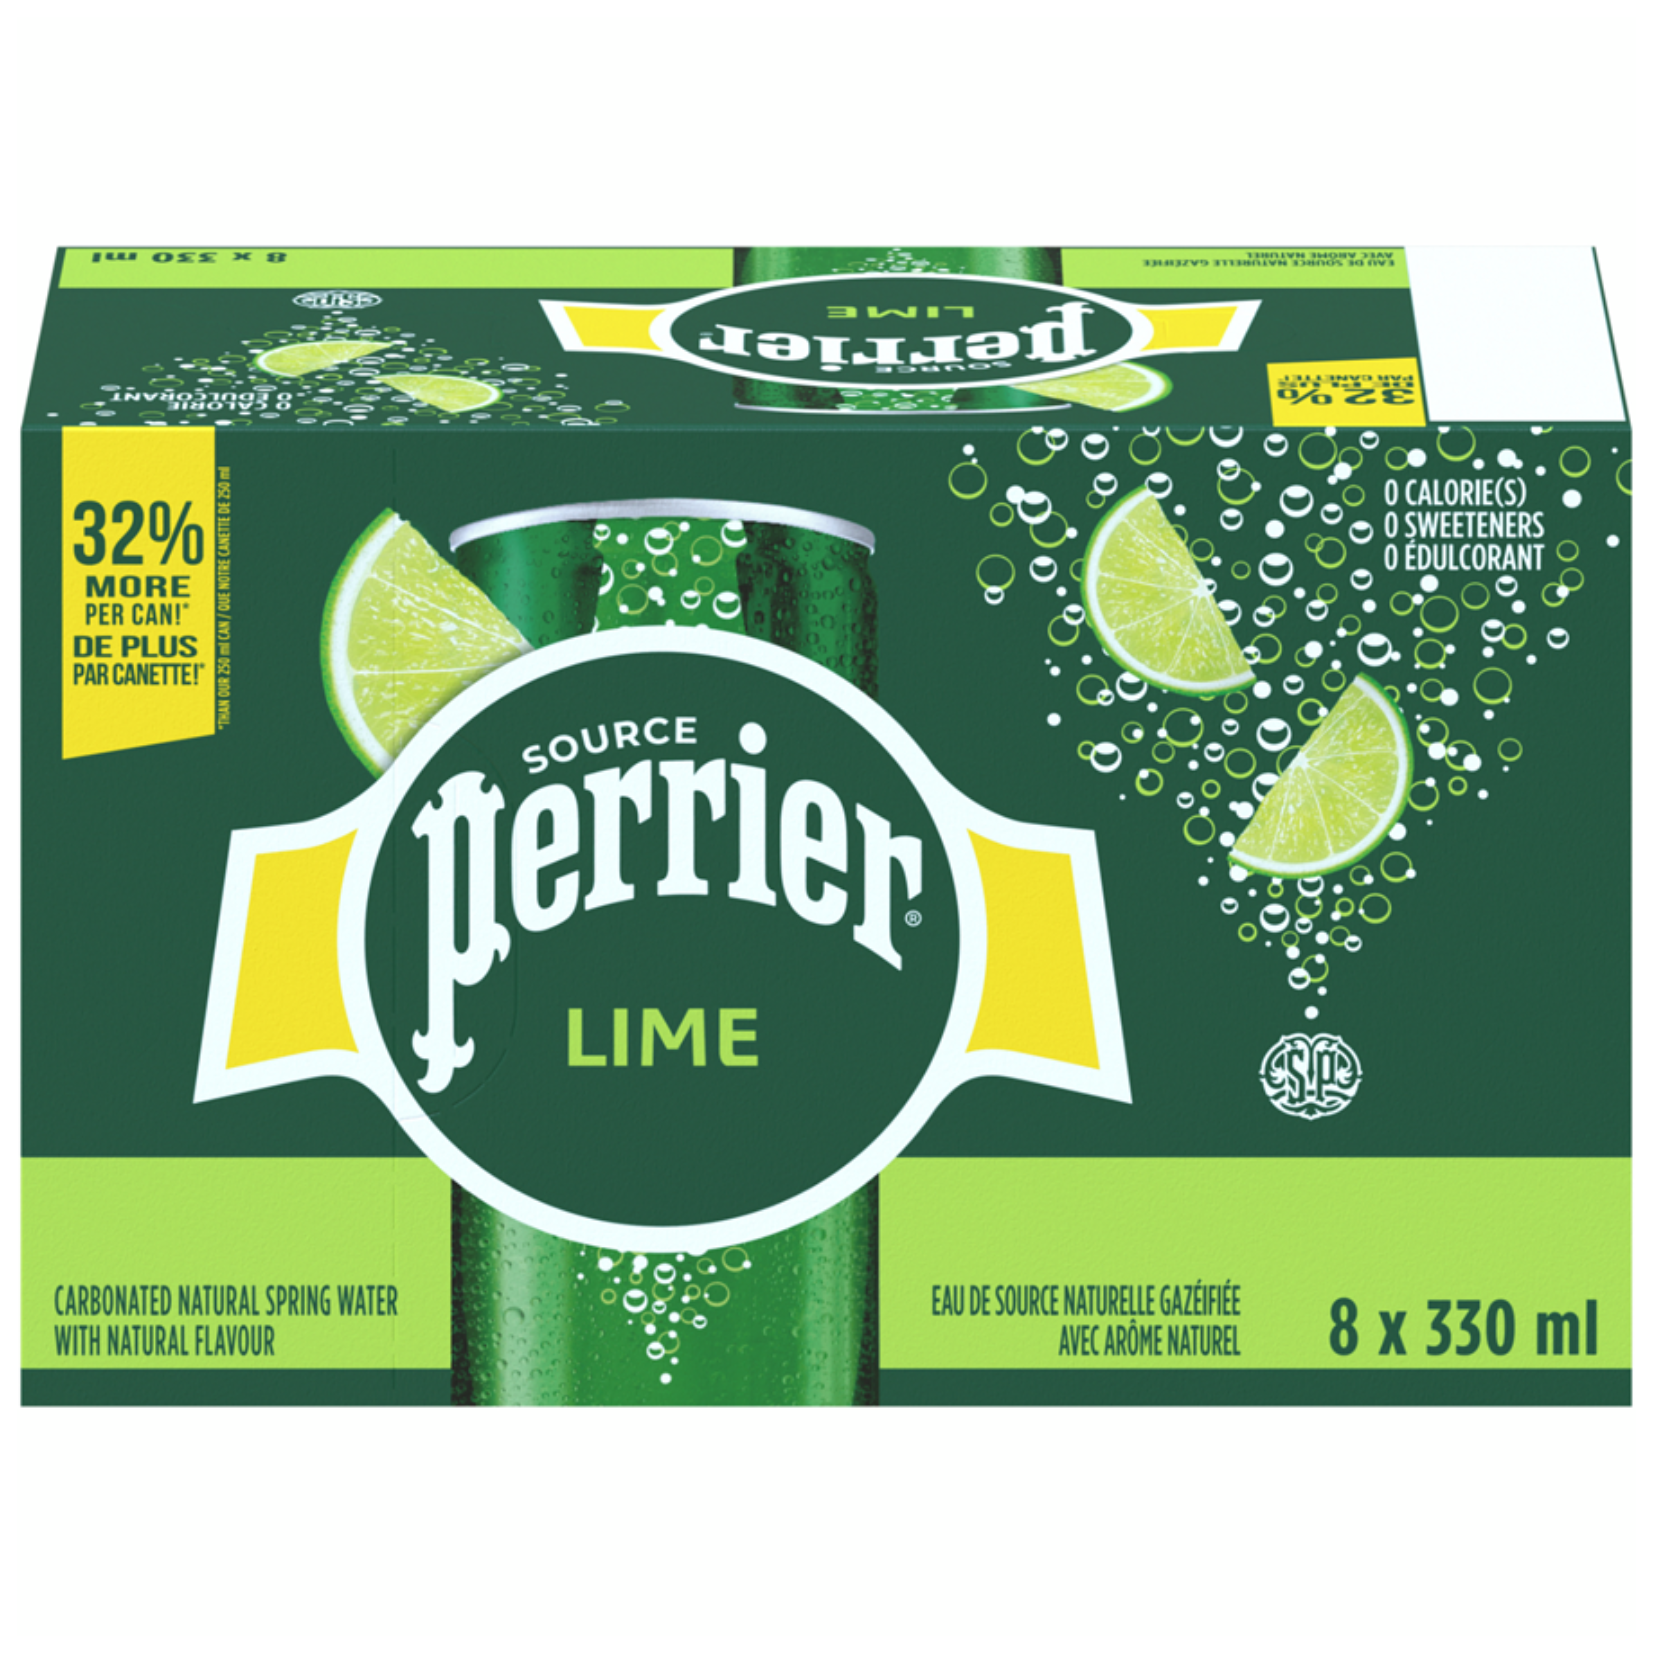 Perrier Lime Carbonated Spring Water 330ml x 8